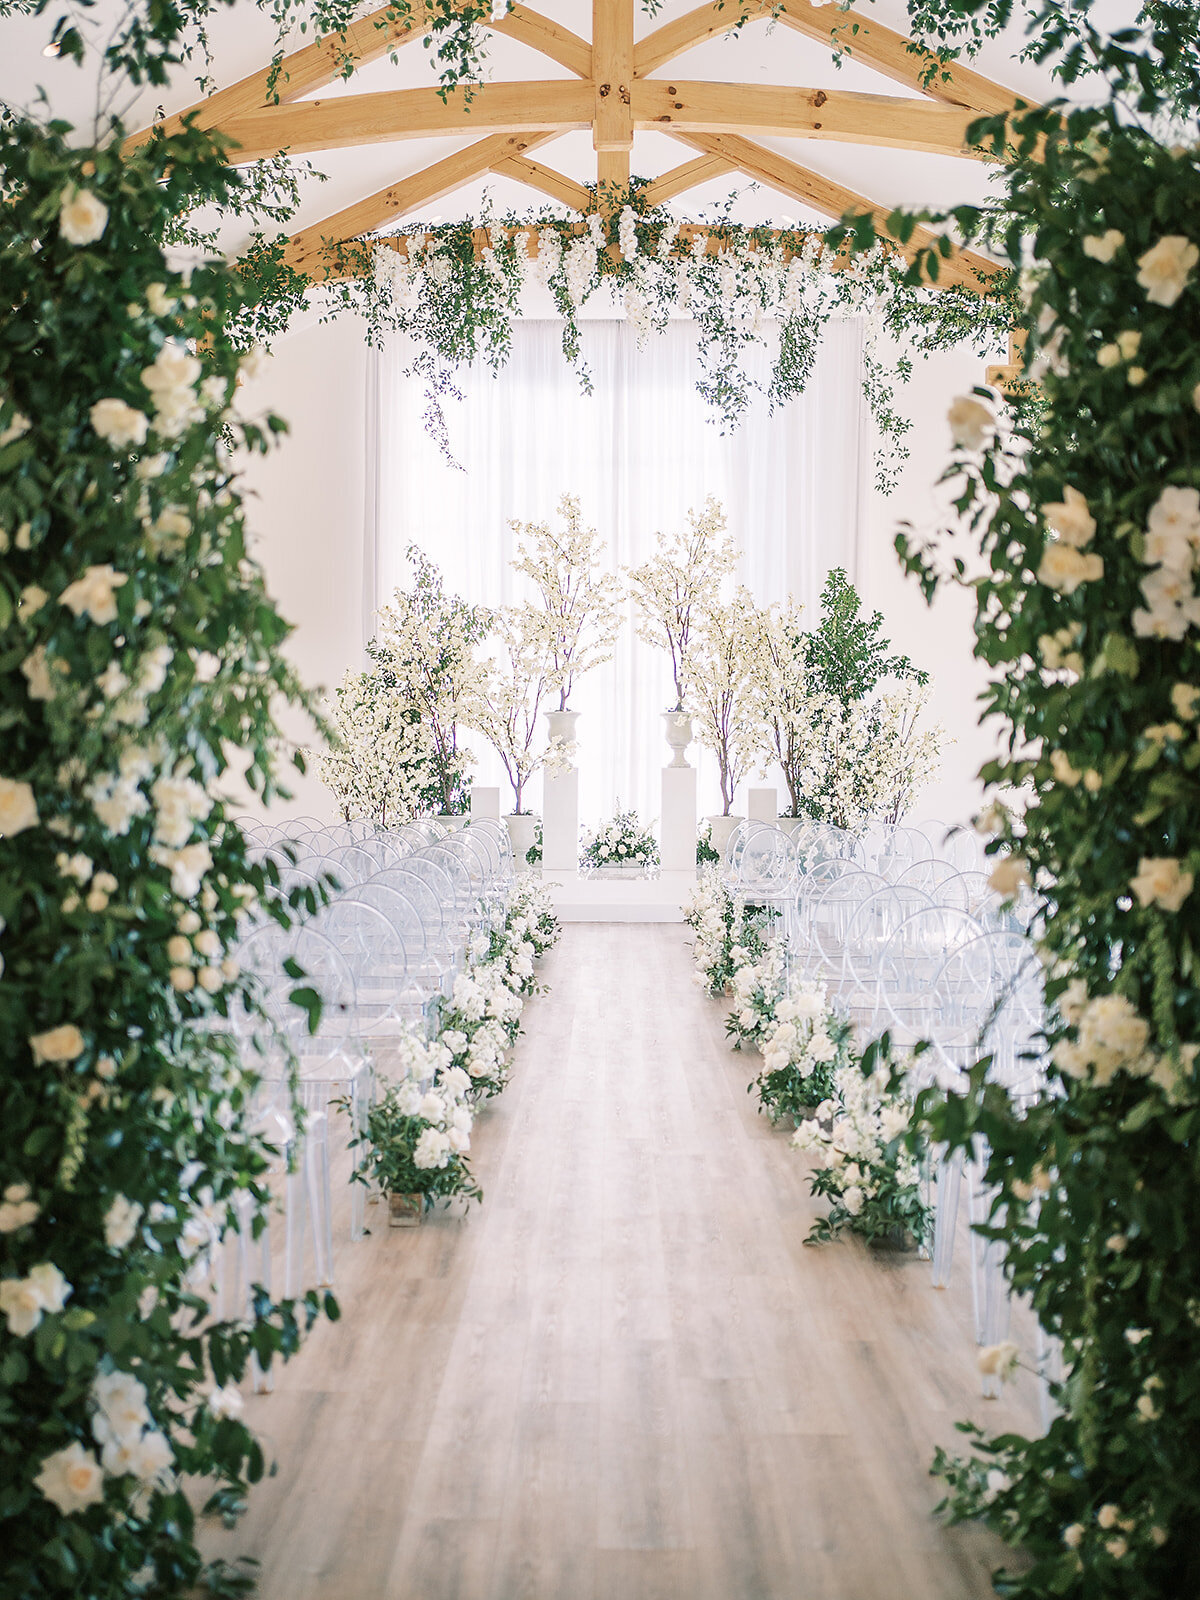 Extravagant flowers fill the chapel of The Arlo in Austin, Texas for a wedding